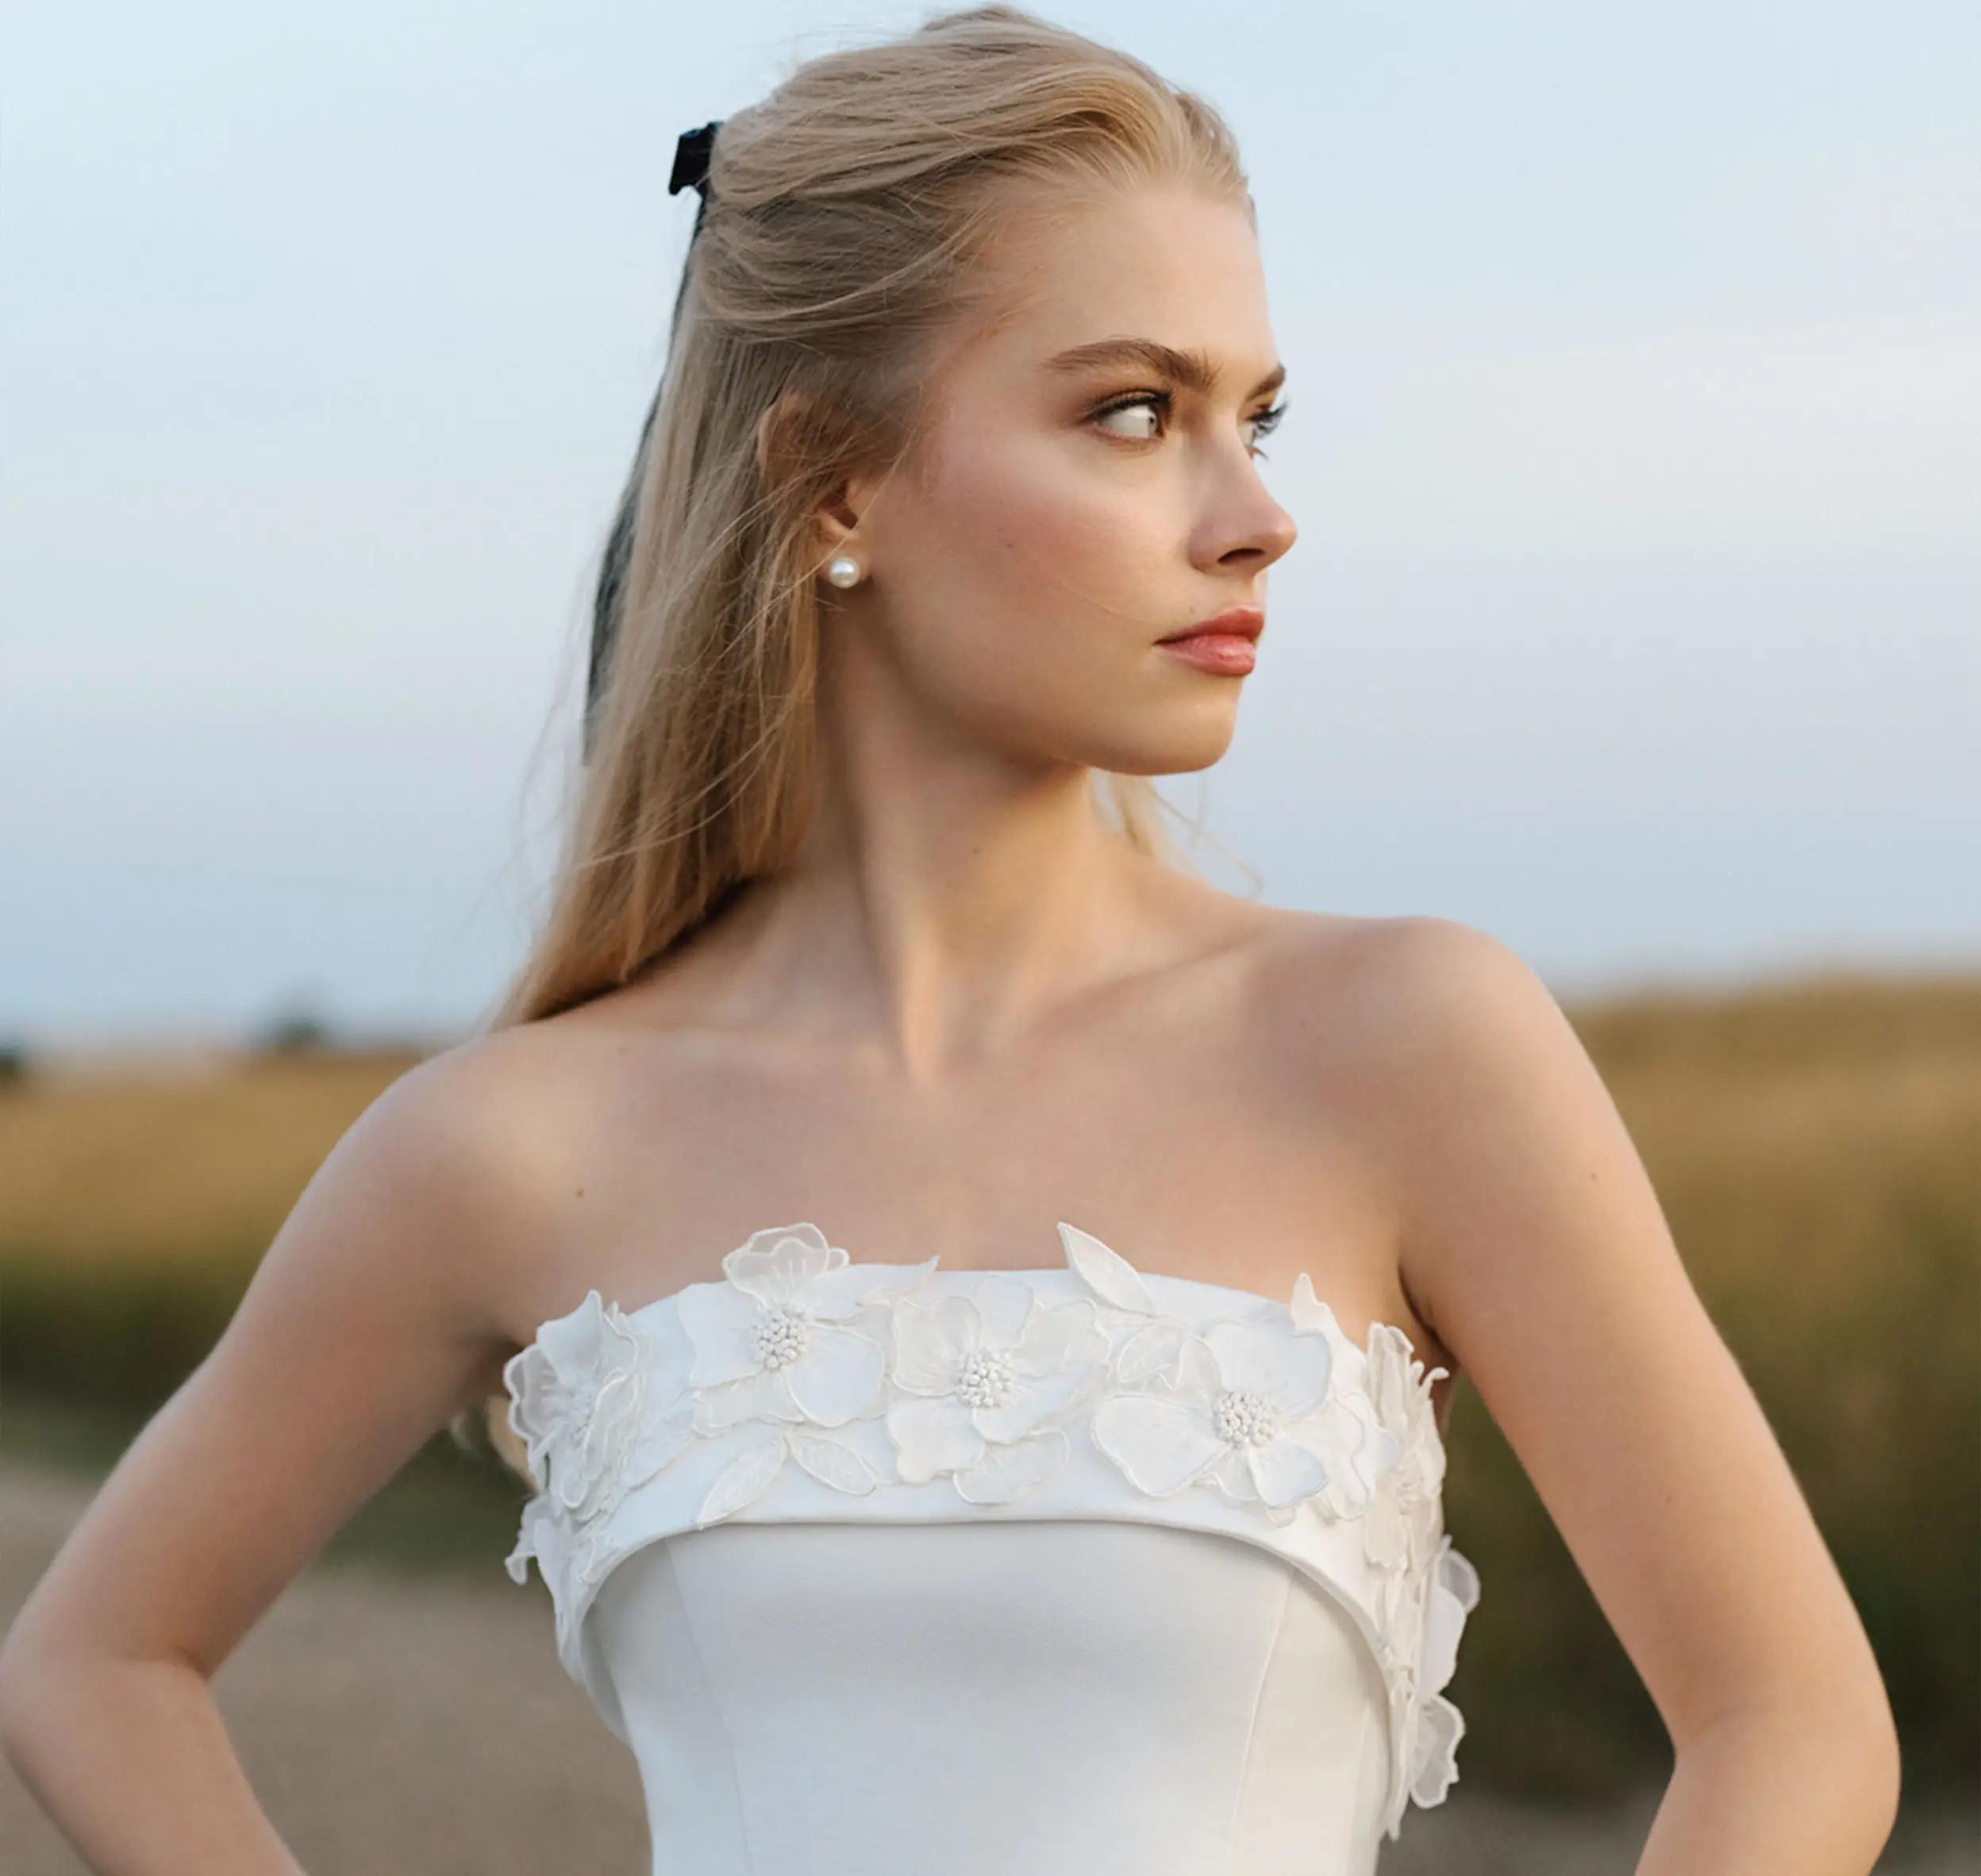 Model wearing a white laced bridal gown